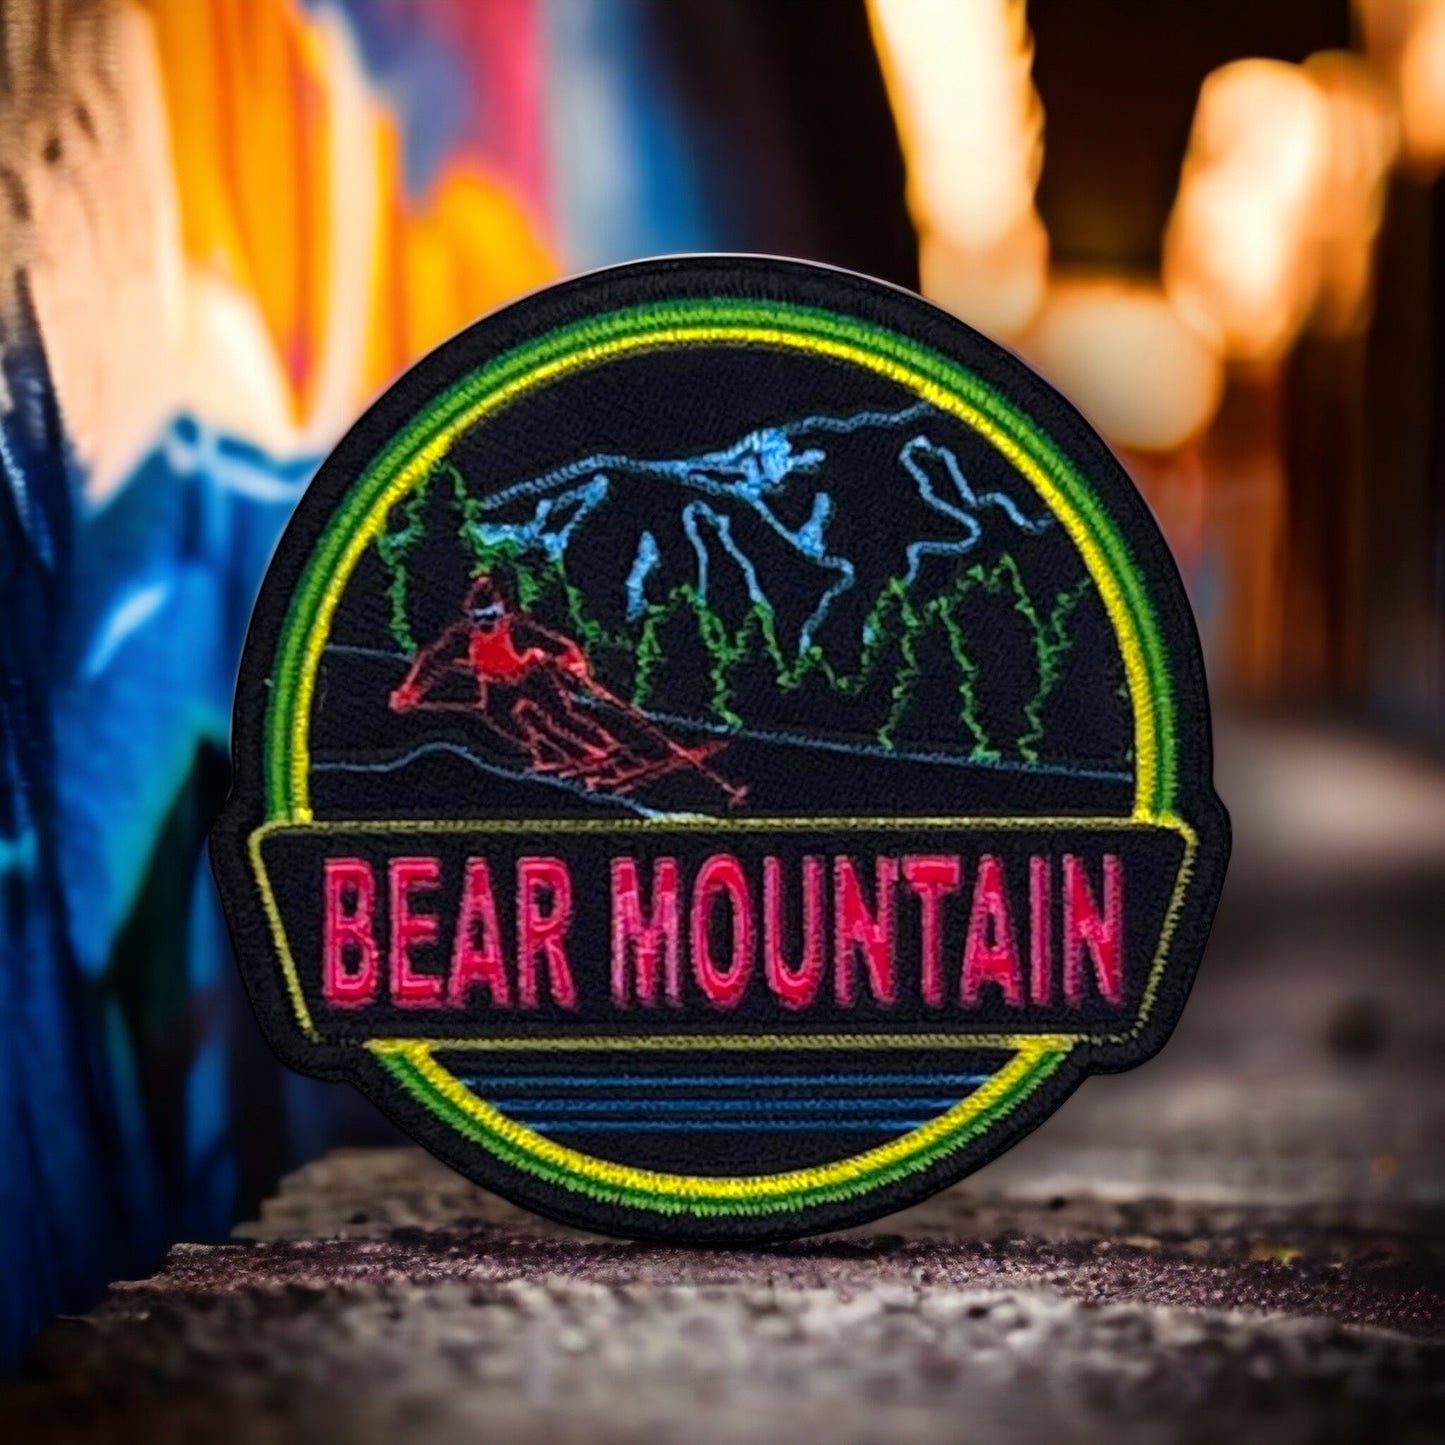 neon black and green patch with a bear mountain logo on it